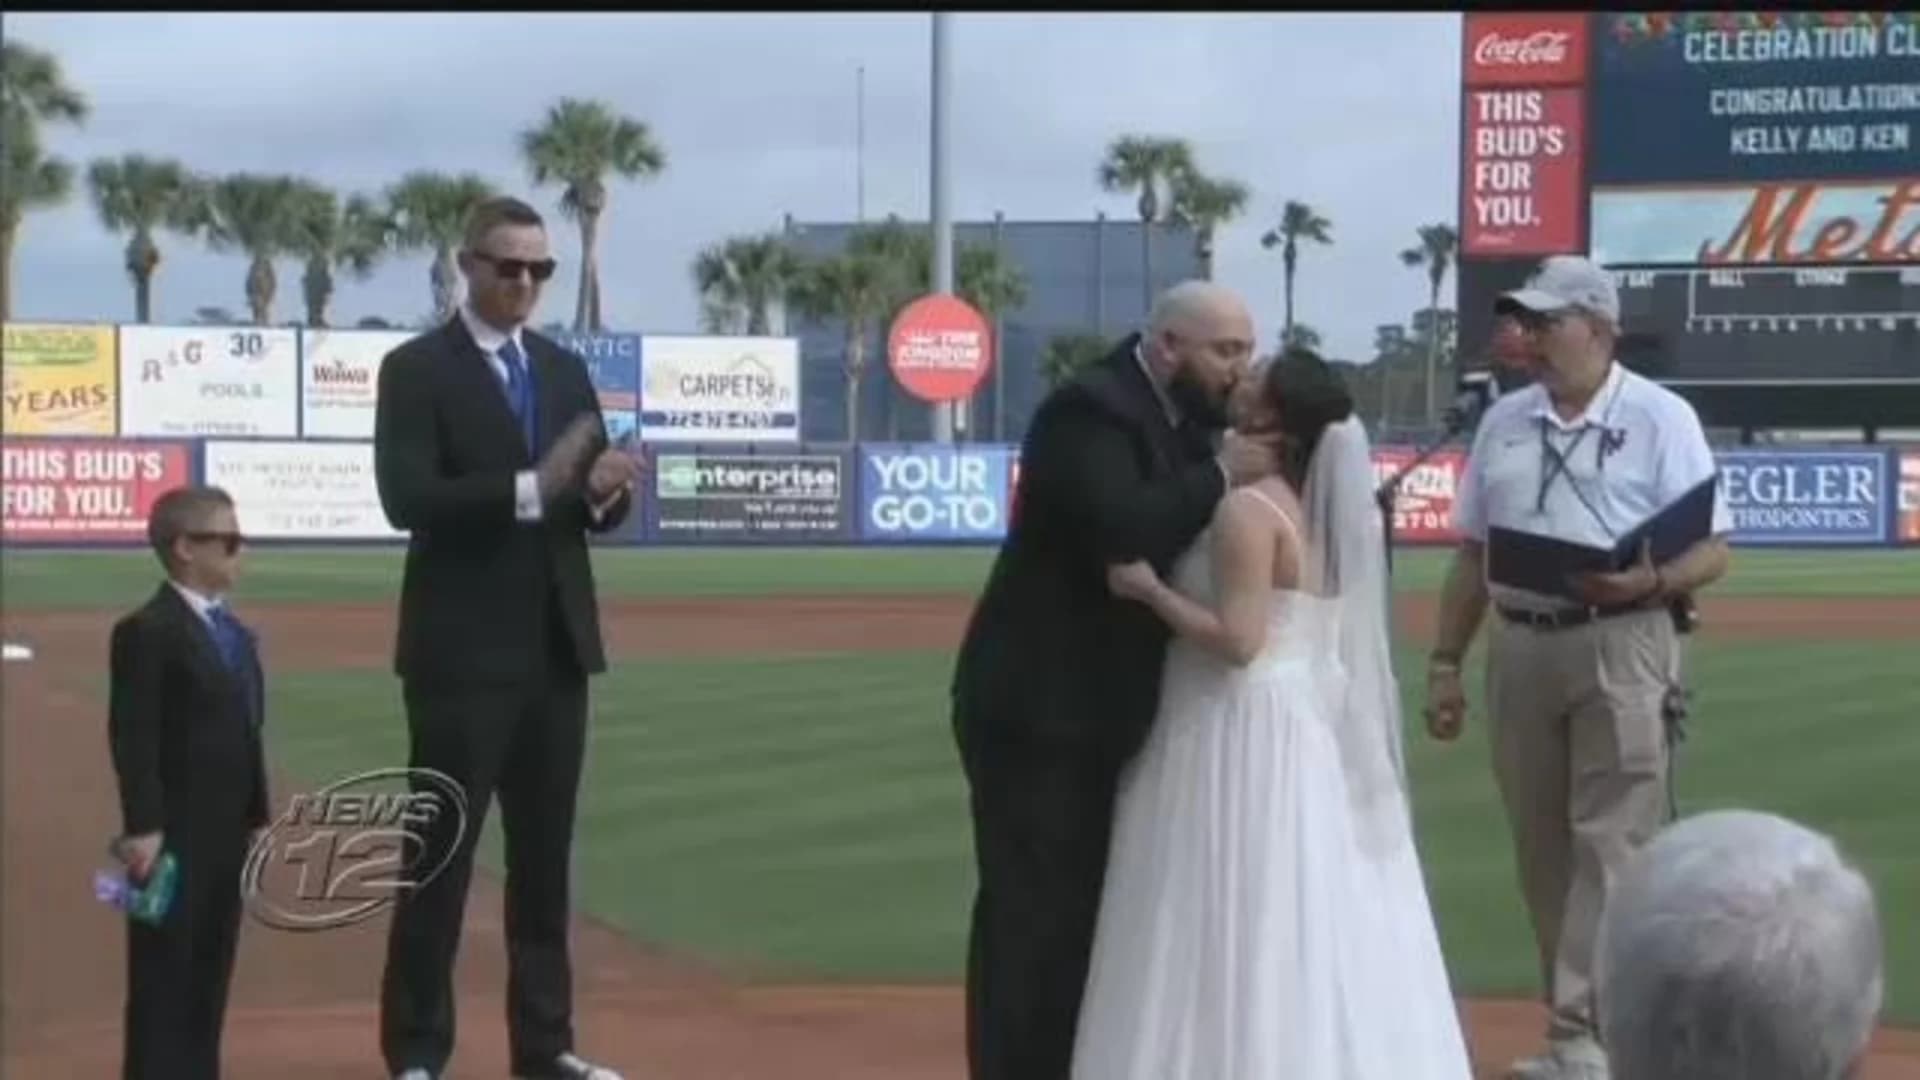 Mets, Red Sox fans swing for the fences, get married before spring training game